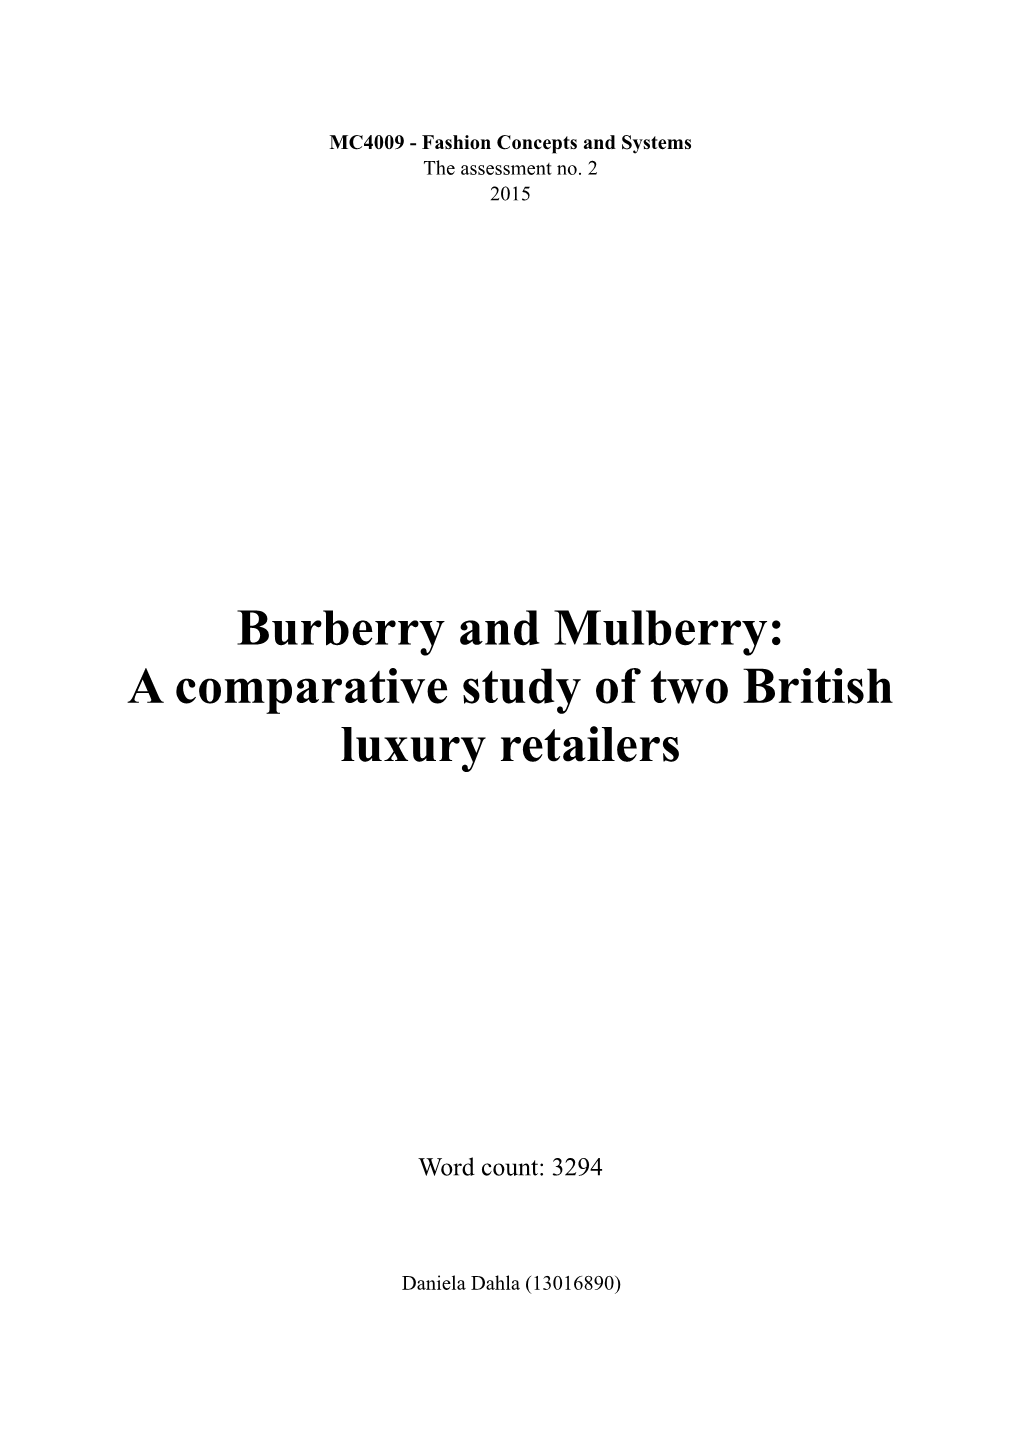 Burberry and Mulberry: a Comparative Study of Two British Luxury Retailers